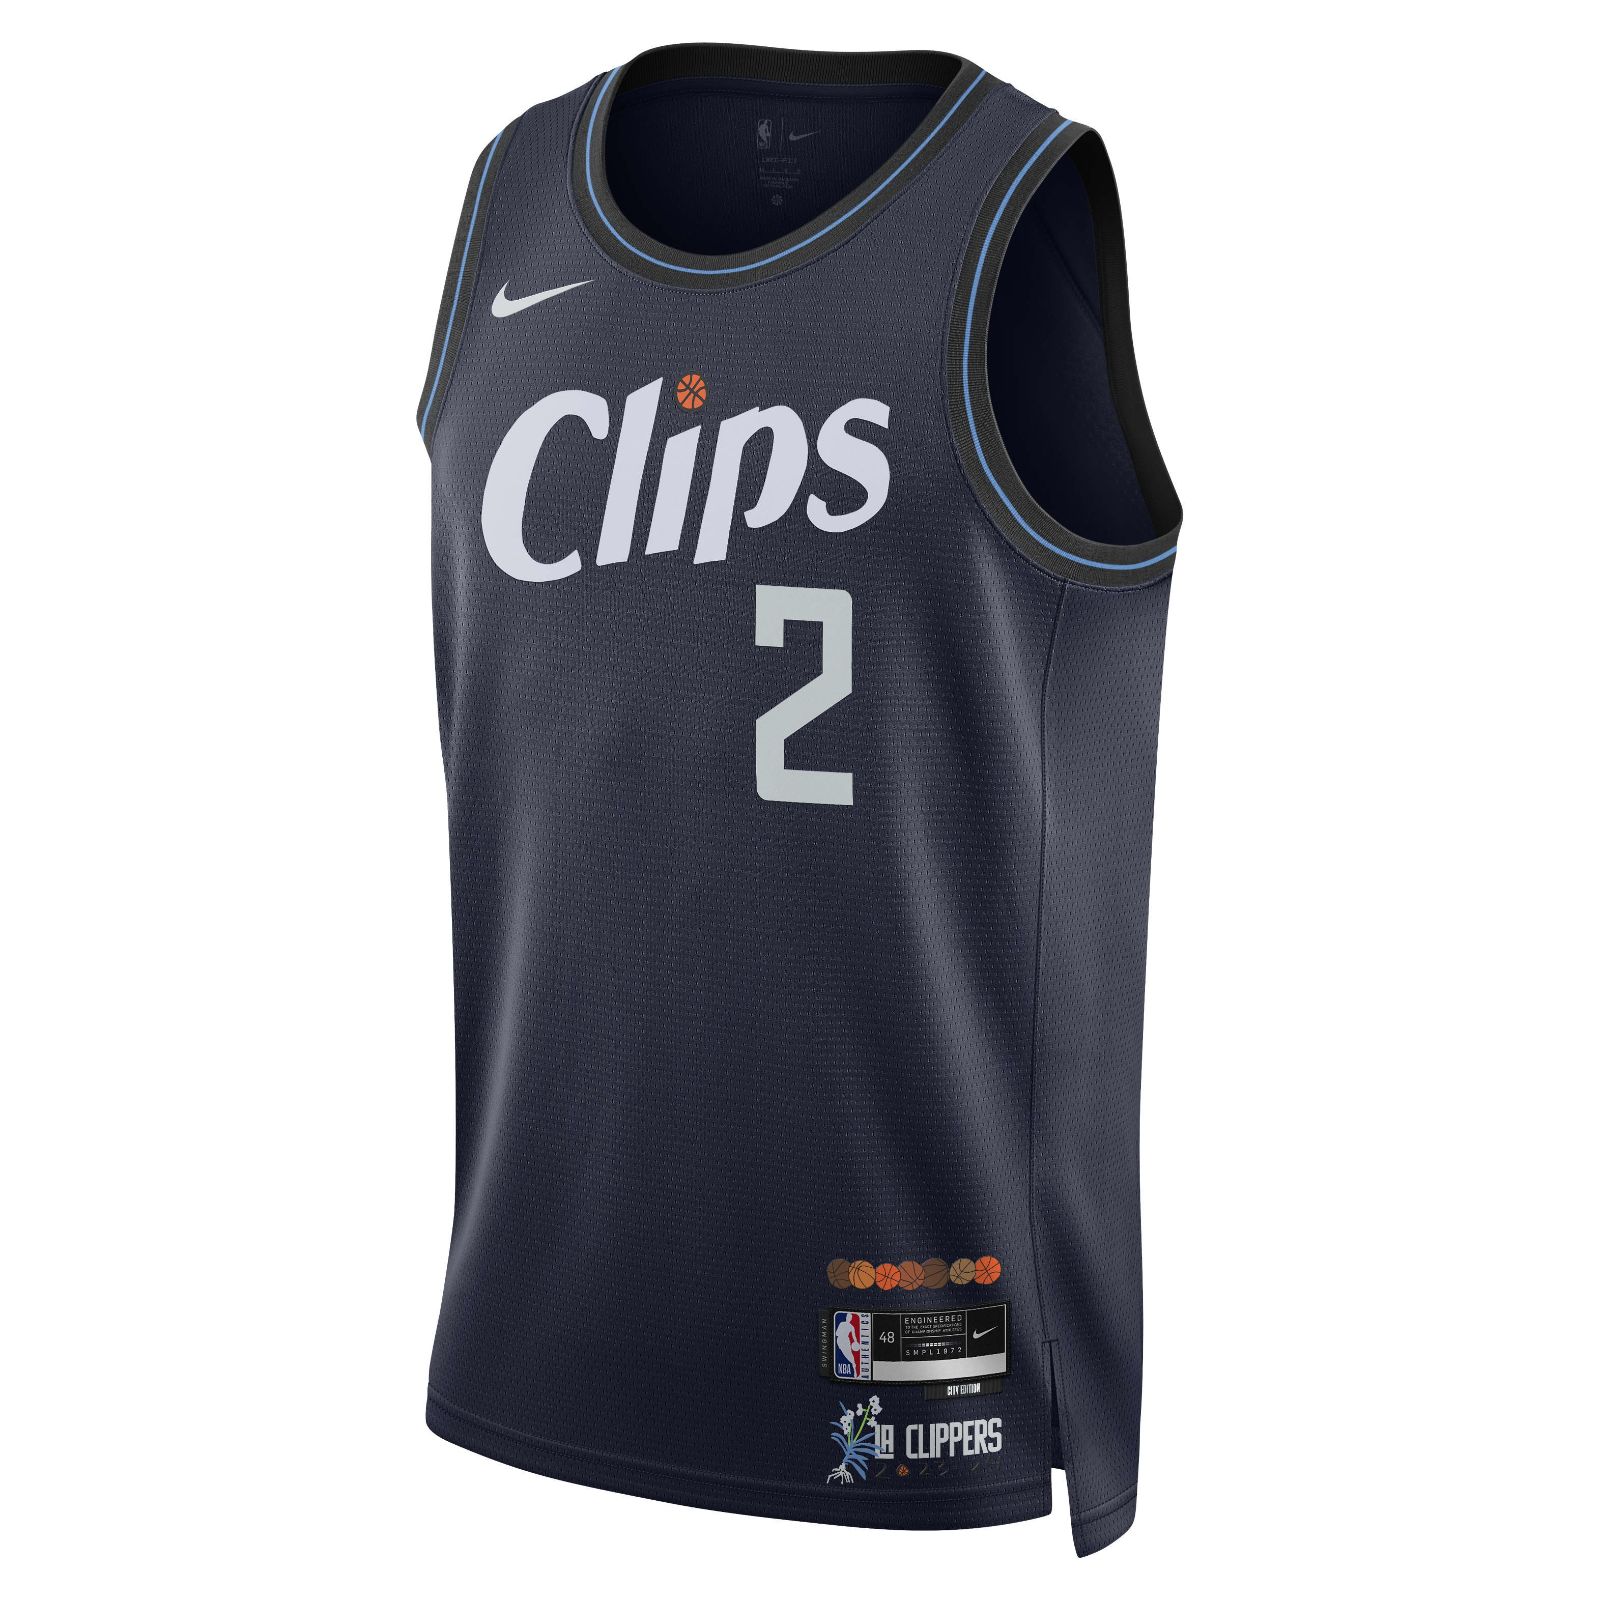 The leaked City Edition jerseys give me big Old School Taco Bell